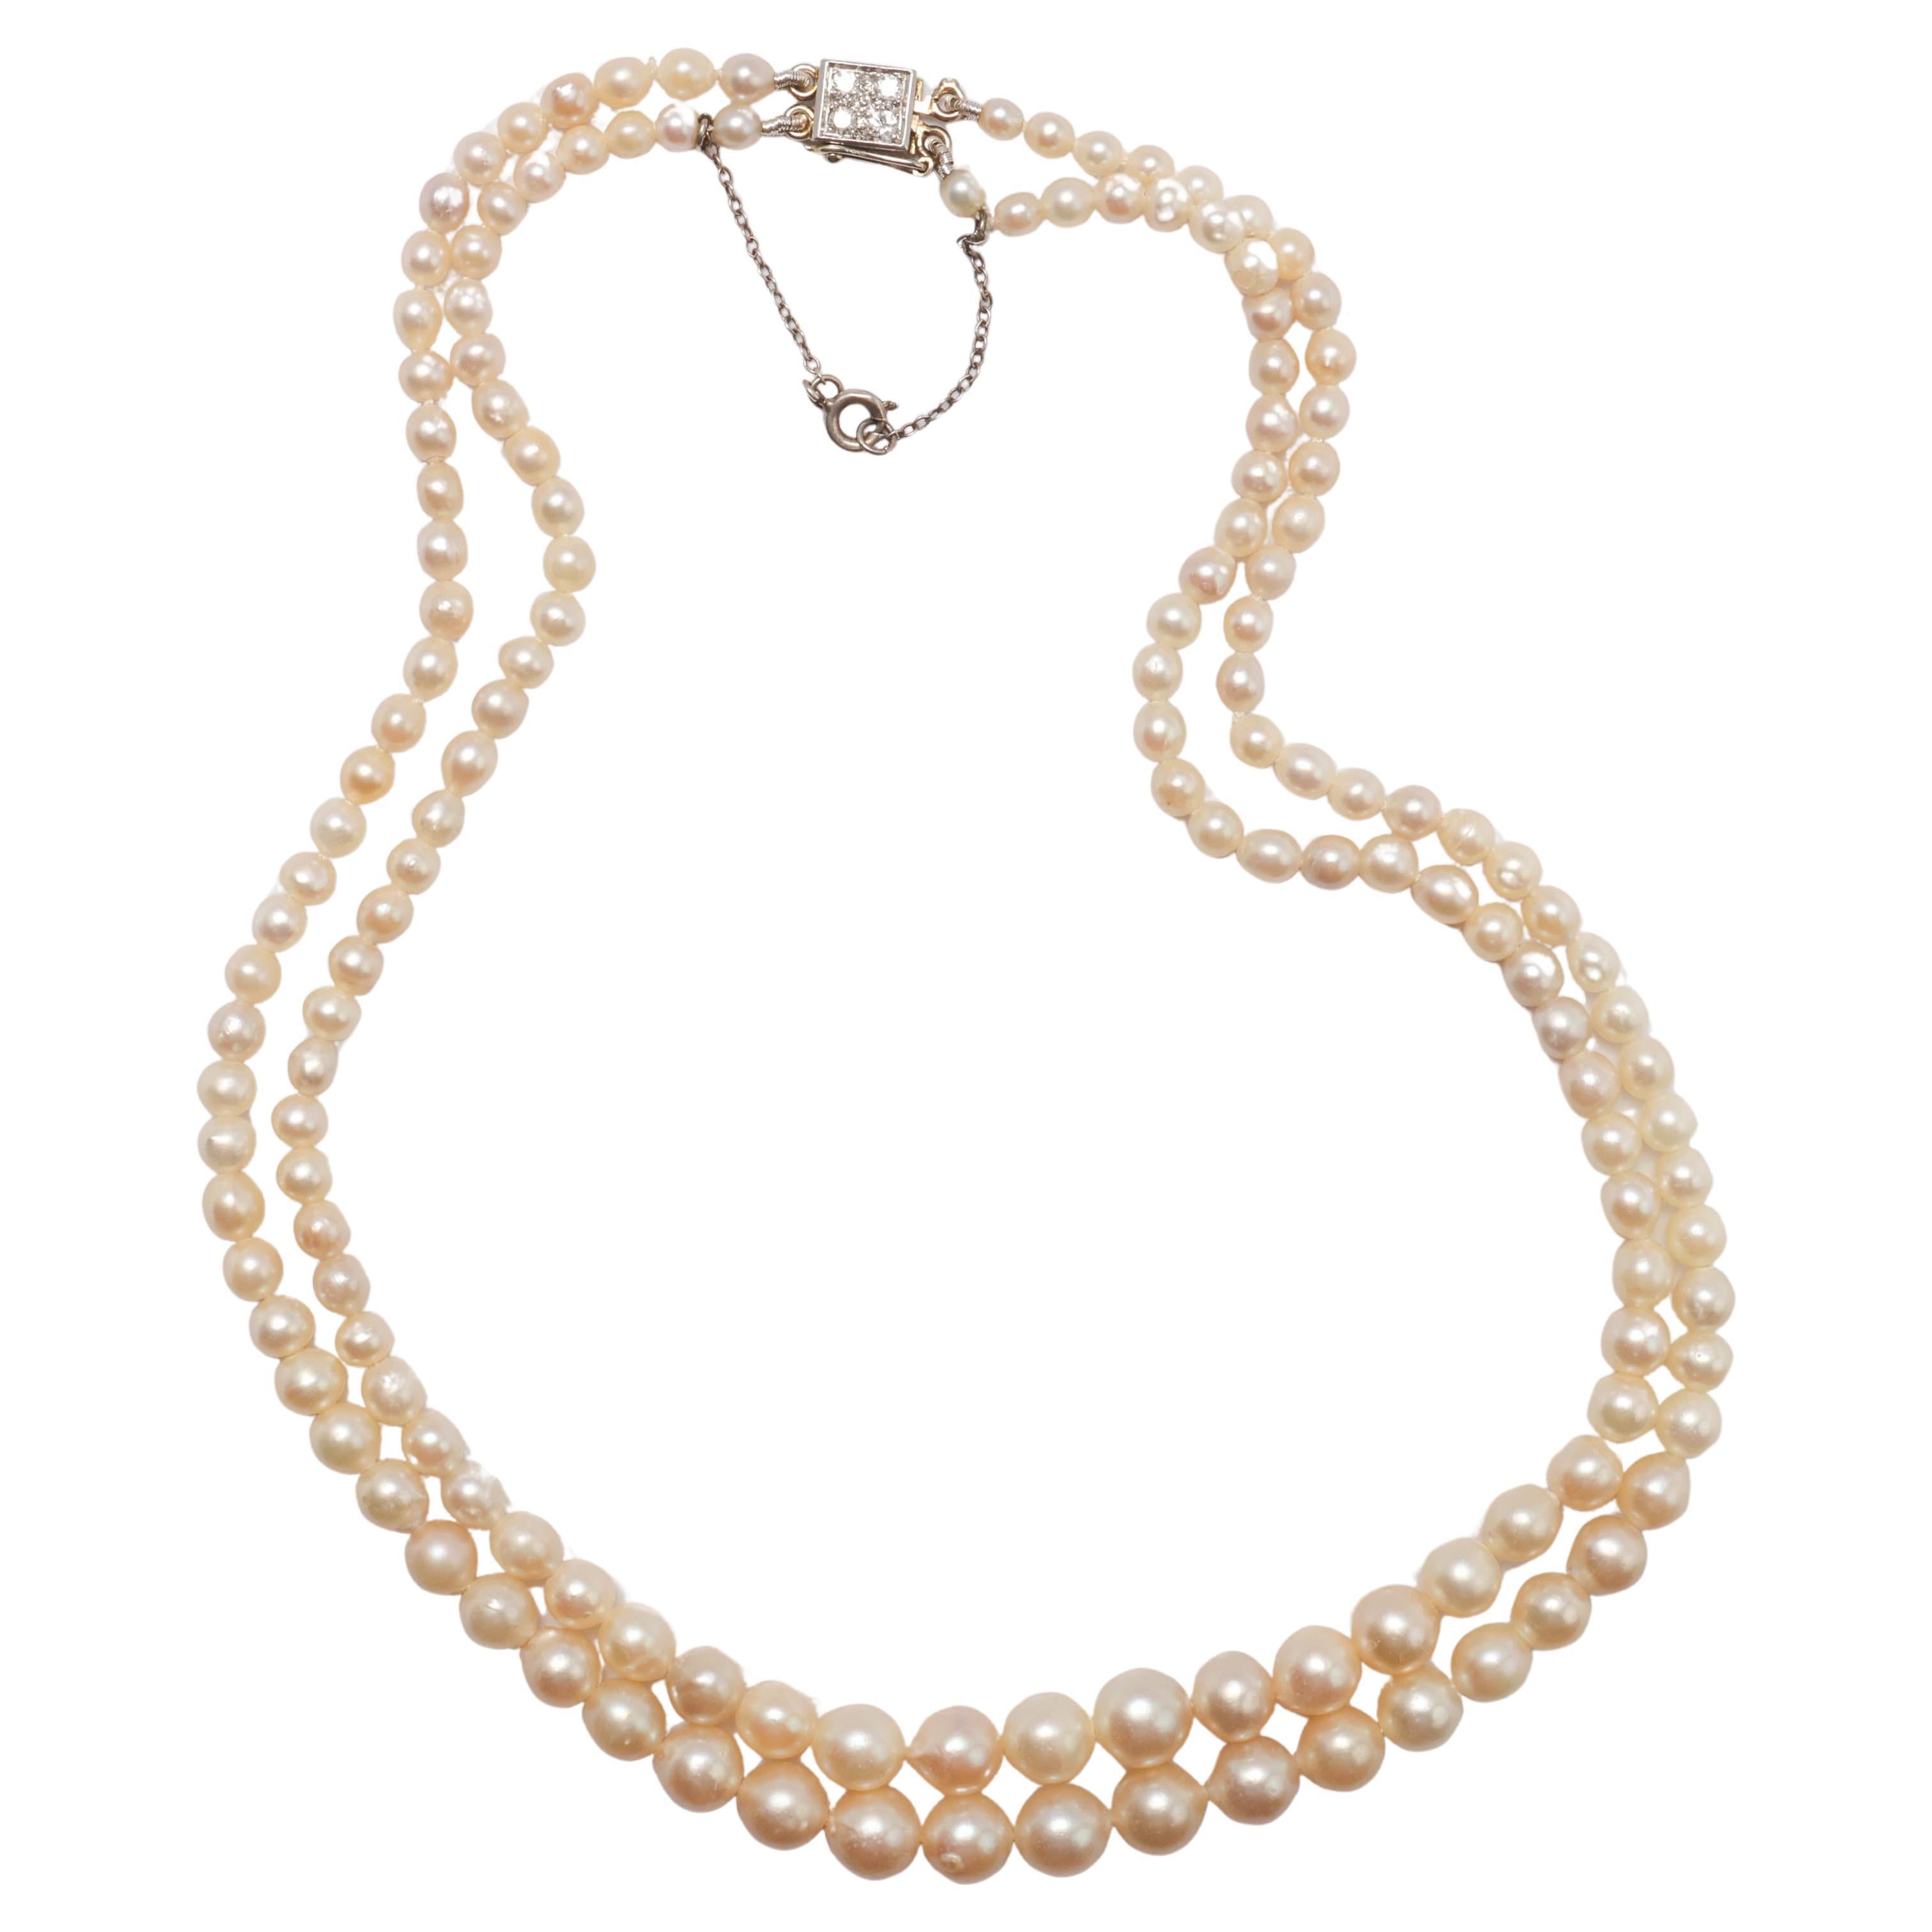 Double Strand Cultured Pearl Necklace with Diamond Clasp, French Art Deco; GIA